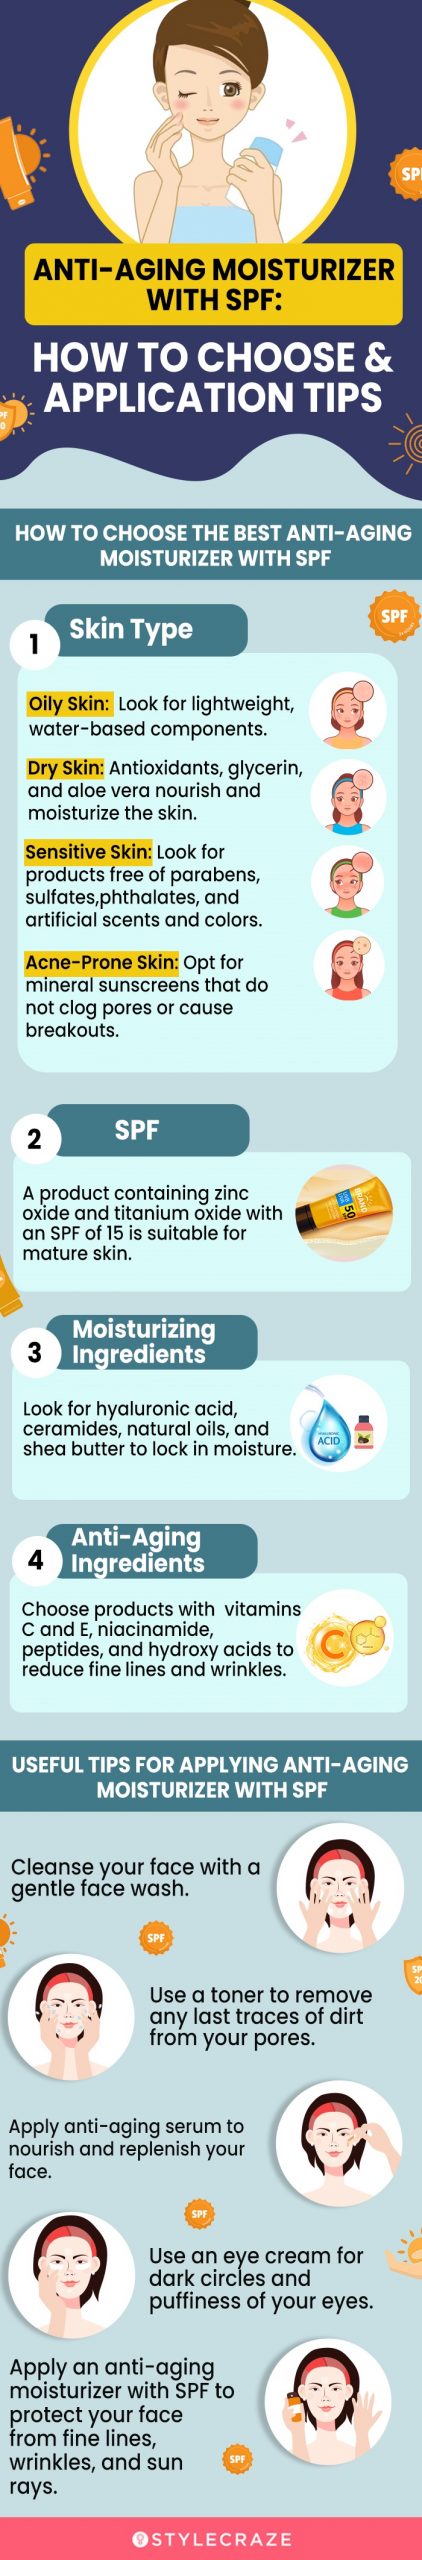 Anti-Aging Moisturizer With SPF: How To Choose & Application Tips